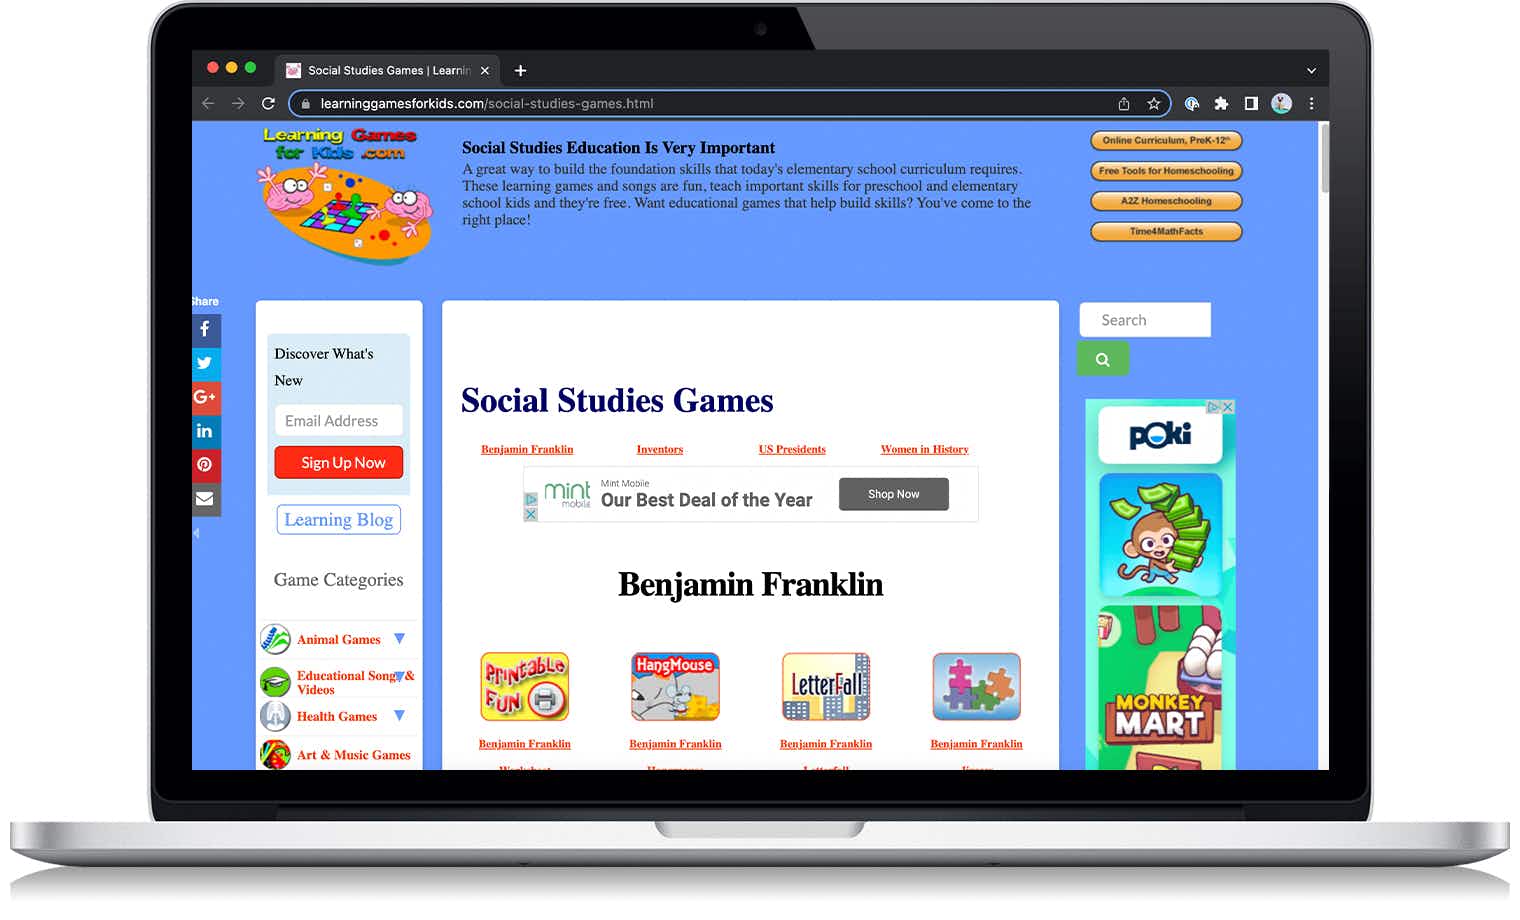 10 Fun and Free Social Studies Game Sites for Kids - The Krazy Coupon Lady